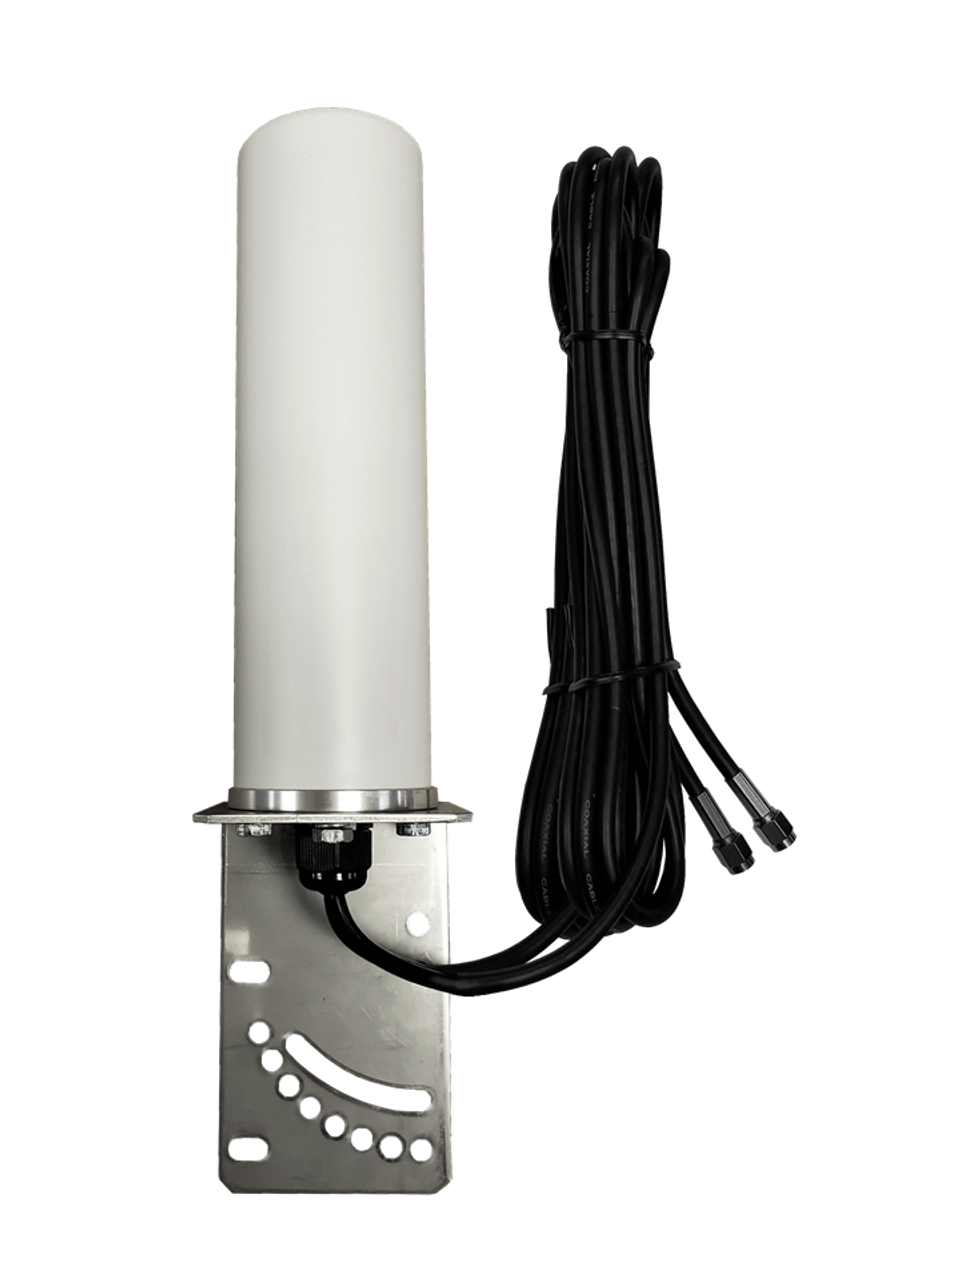 M19 Sierra Wireless RV55 Gateway M19 Omni Directional MIMO Cellular 4G LTE AWS XLTE M2M IoT Antenna w/16ft Coax Cables -2  x SMA